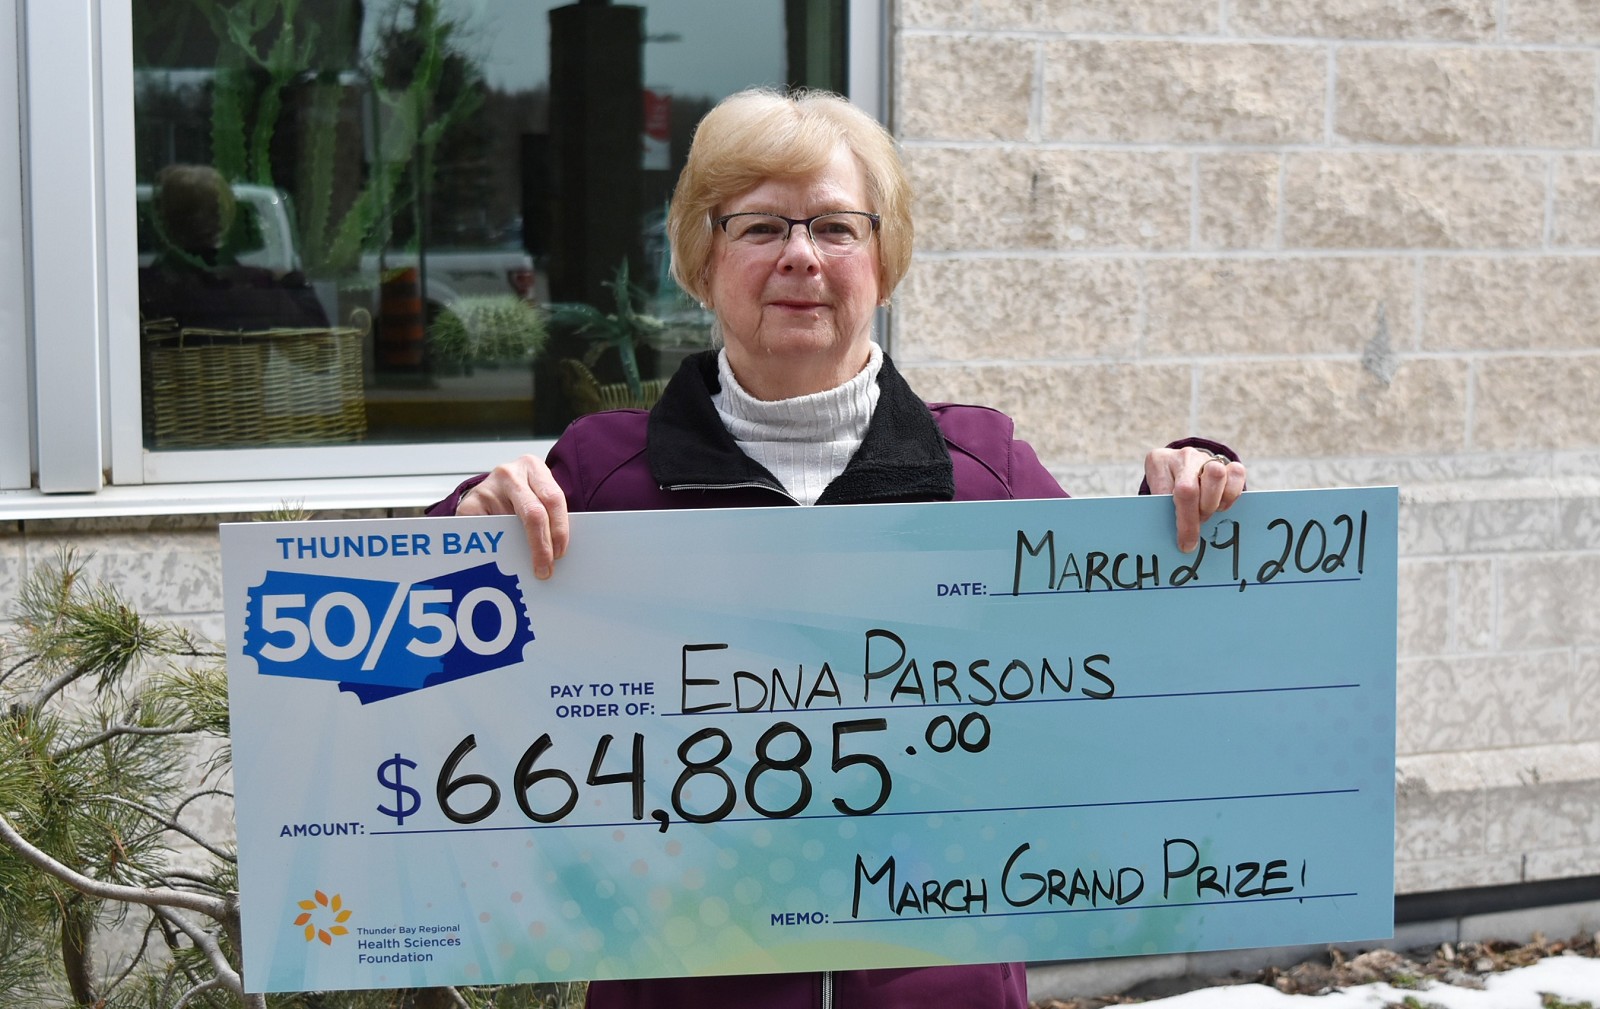 Thunder Bay 50/50: Edna Parsons takes home $664,885 in March Grand Prize Draw